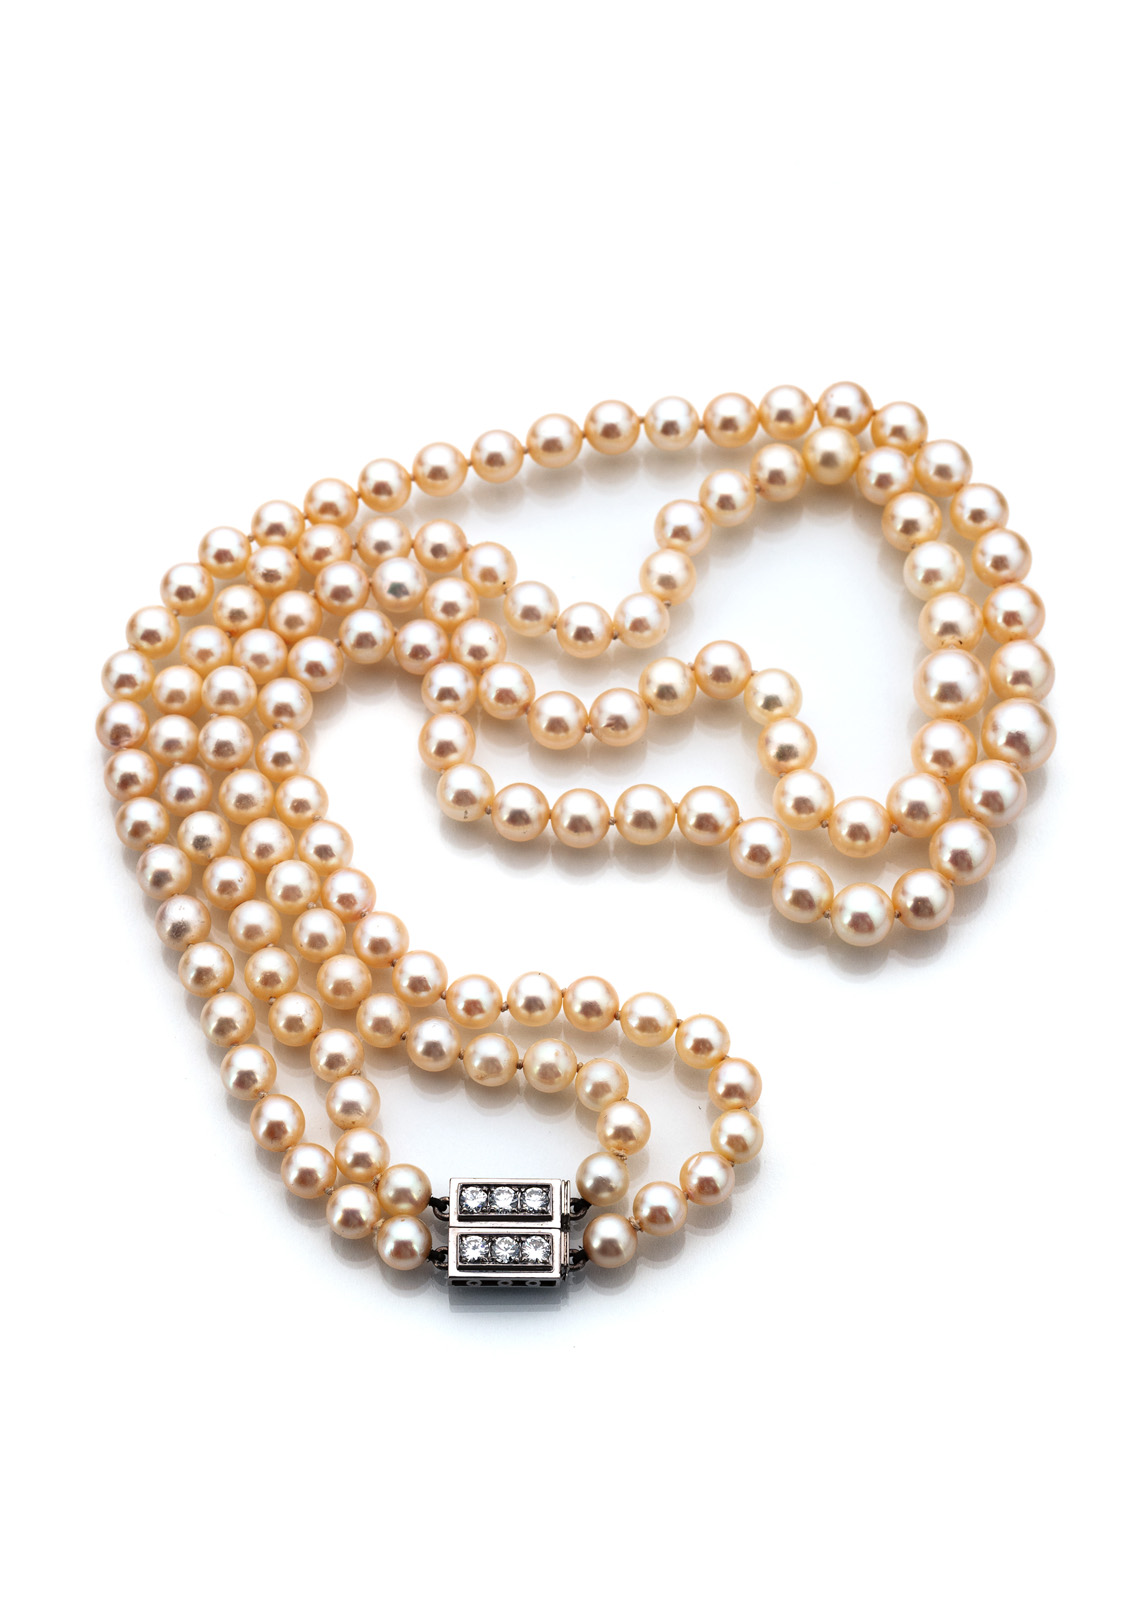 <b>A FINE TWO-ROW CULTURED PEARL NECKLACE</b>